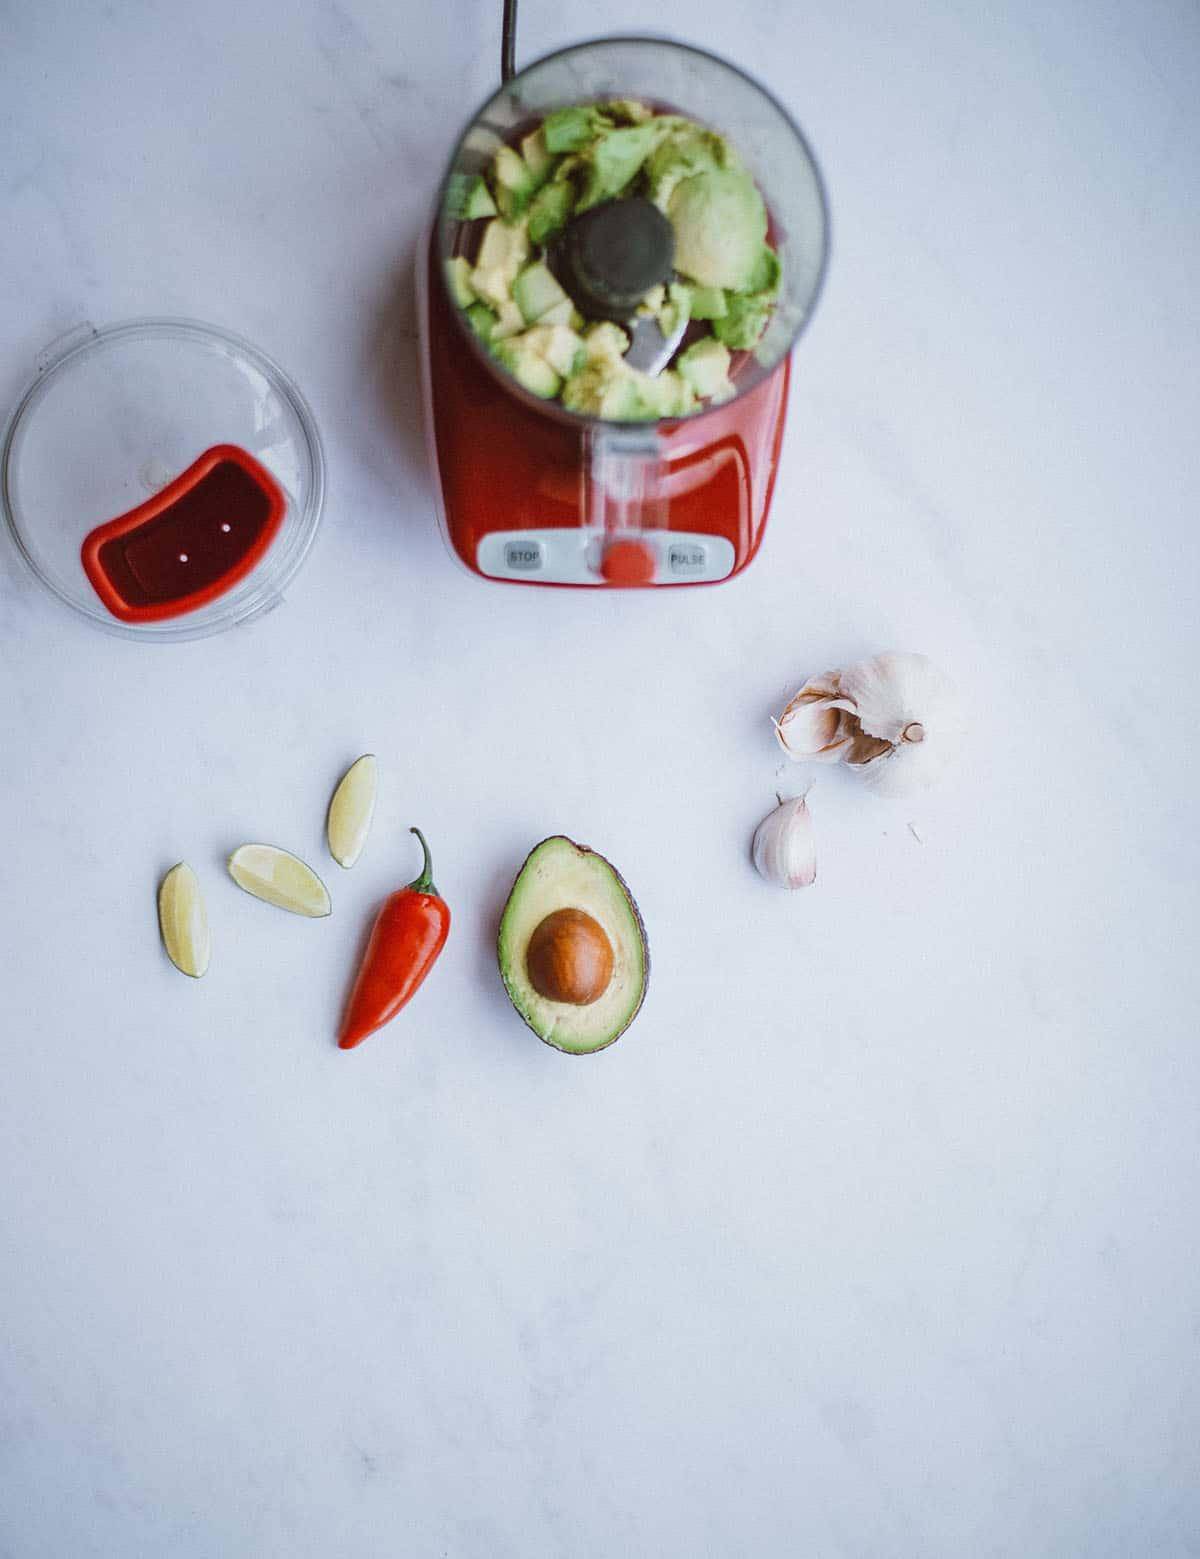 Red food processor holding avocado chunks with half an avocado, chili and garlic next to it